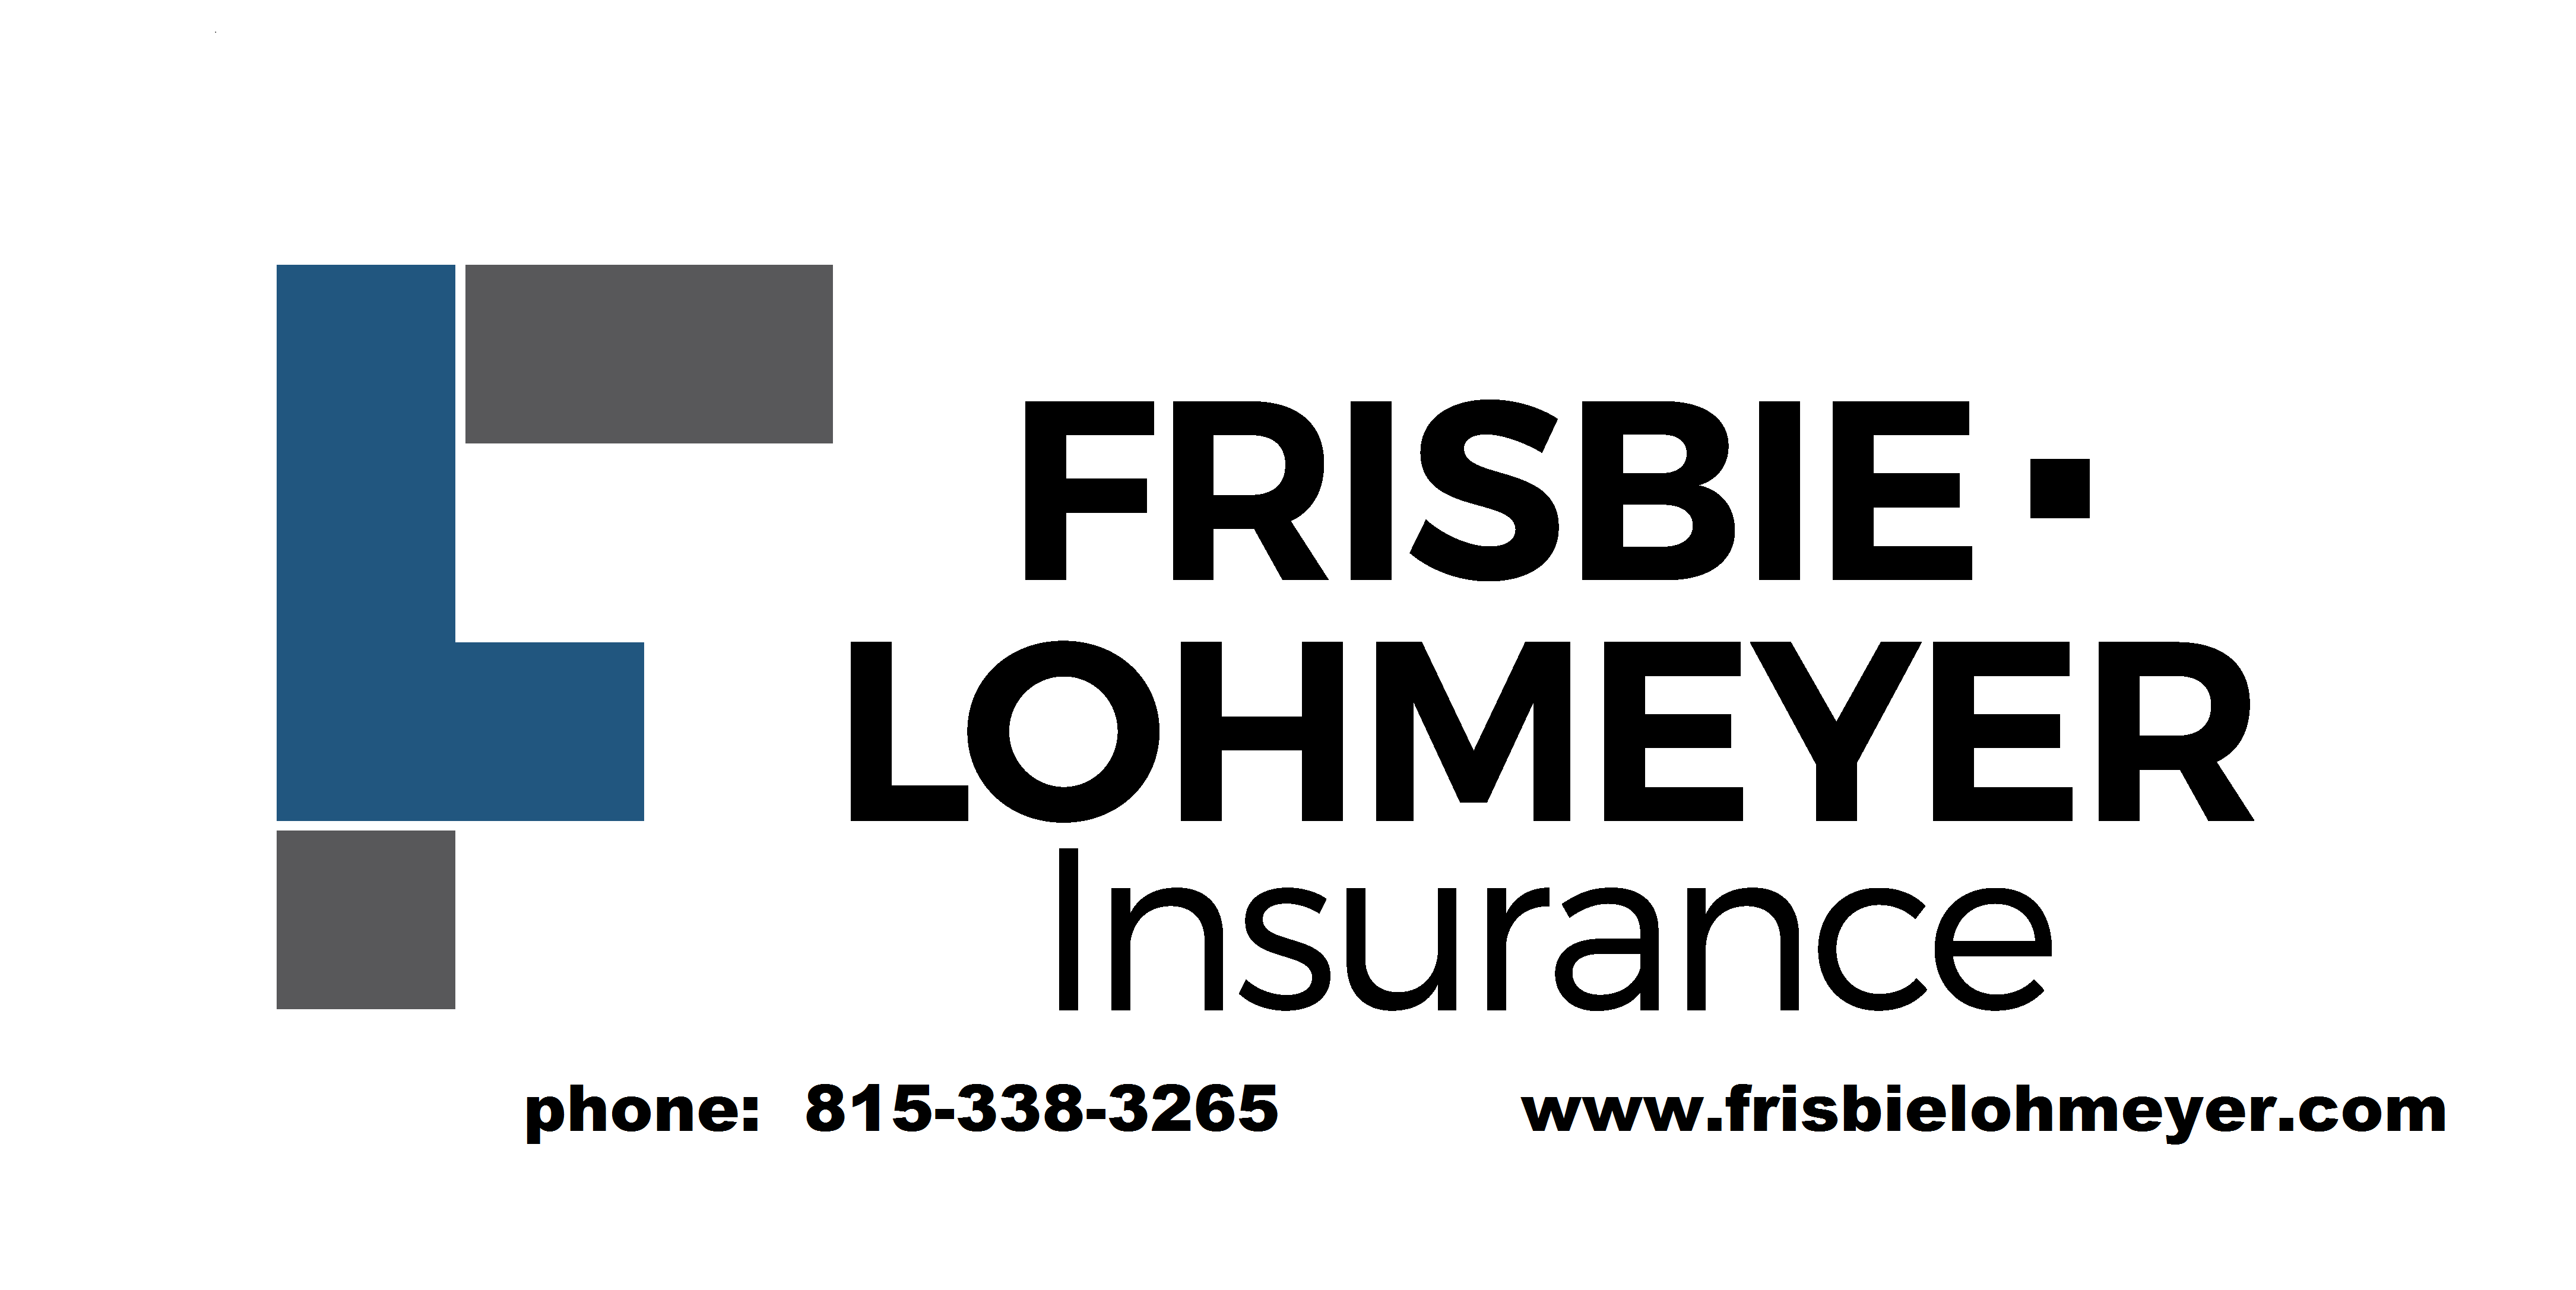 Frisbie and Lohmeyer + phone and web